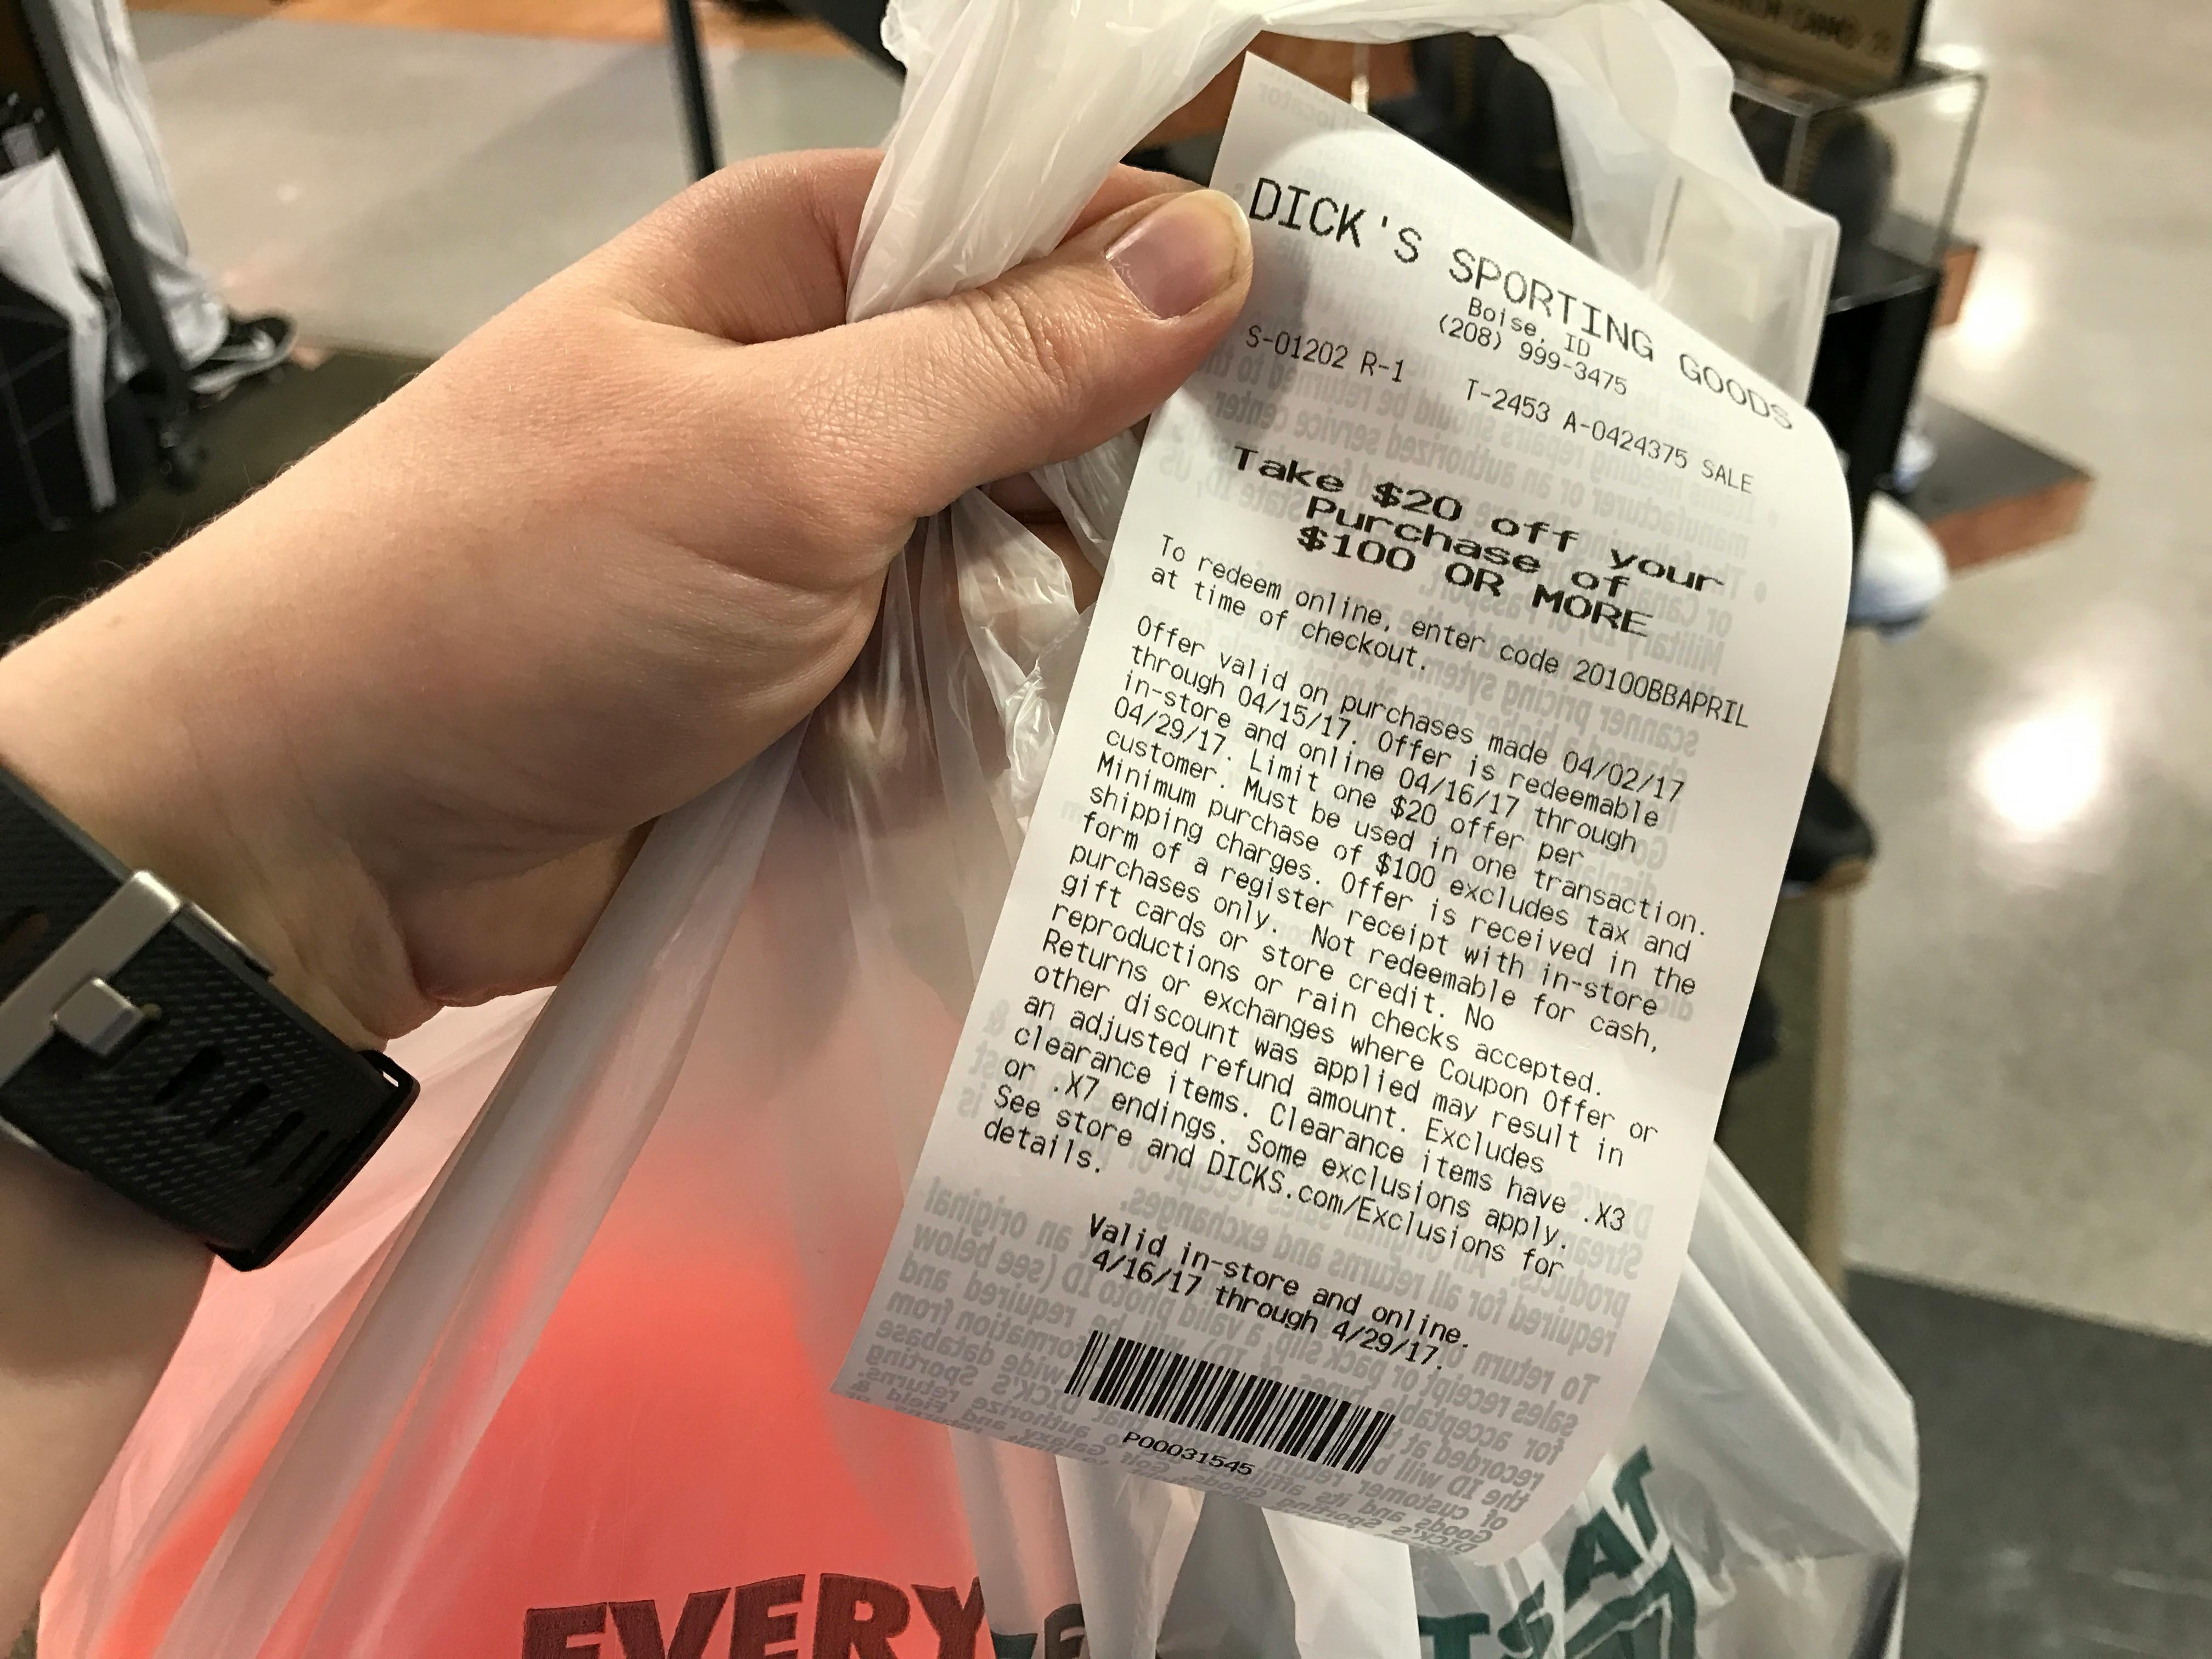 A person's hand holding a Dick's Sporting Goods bag and a receipt with a coupon for $20 off of a purchase of $100 or more.